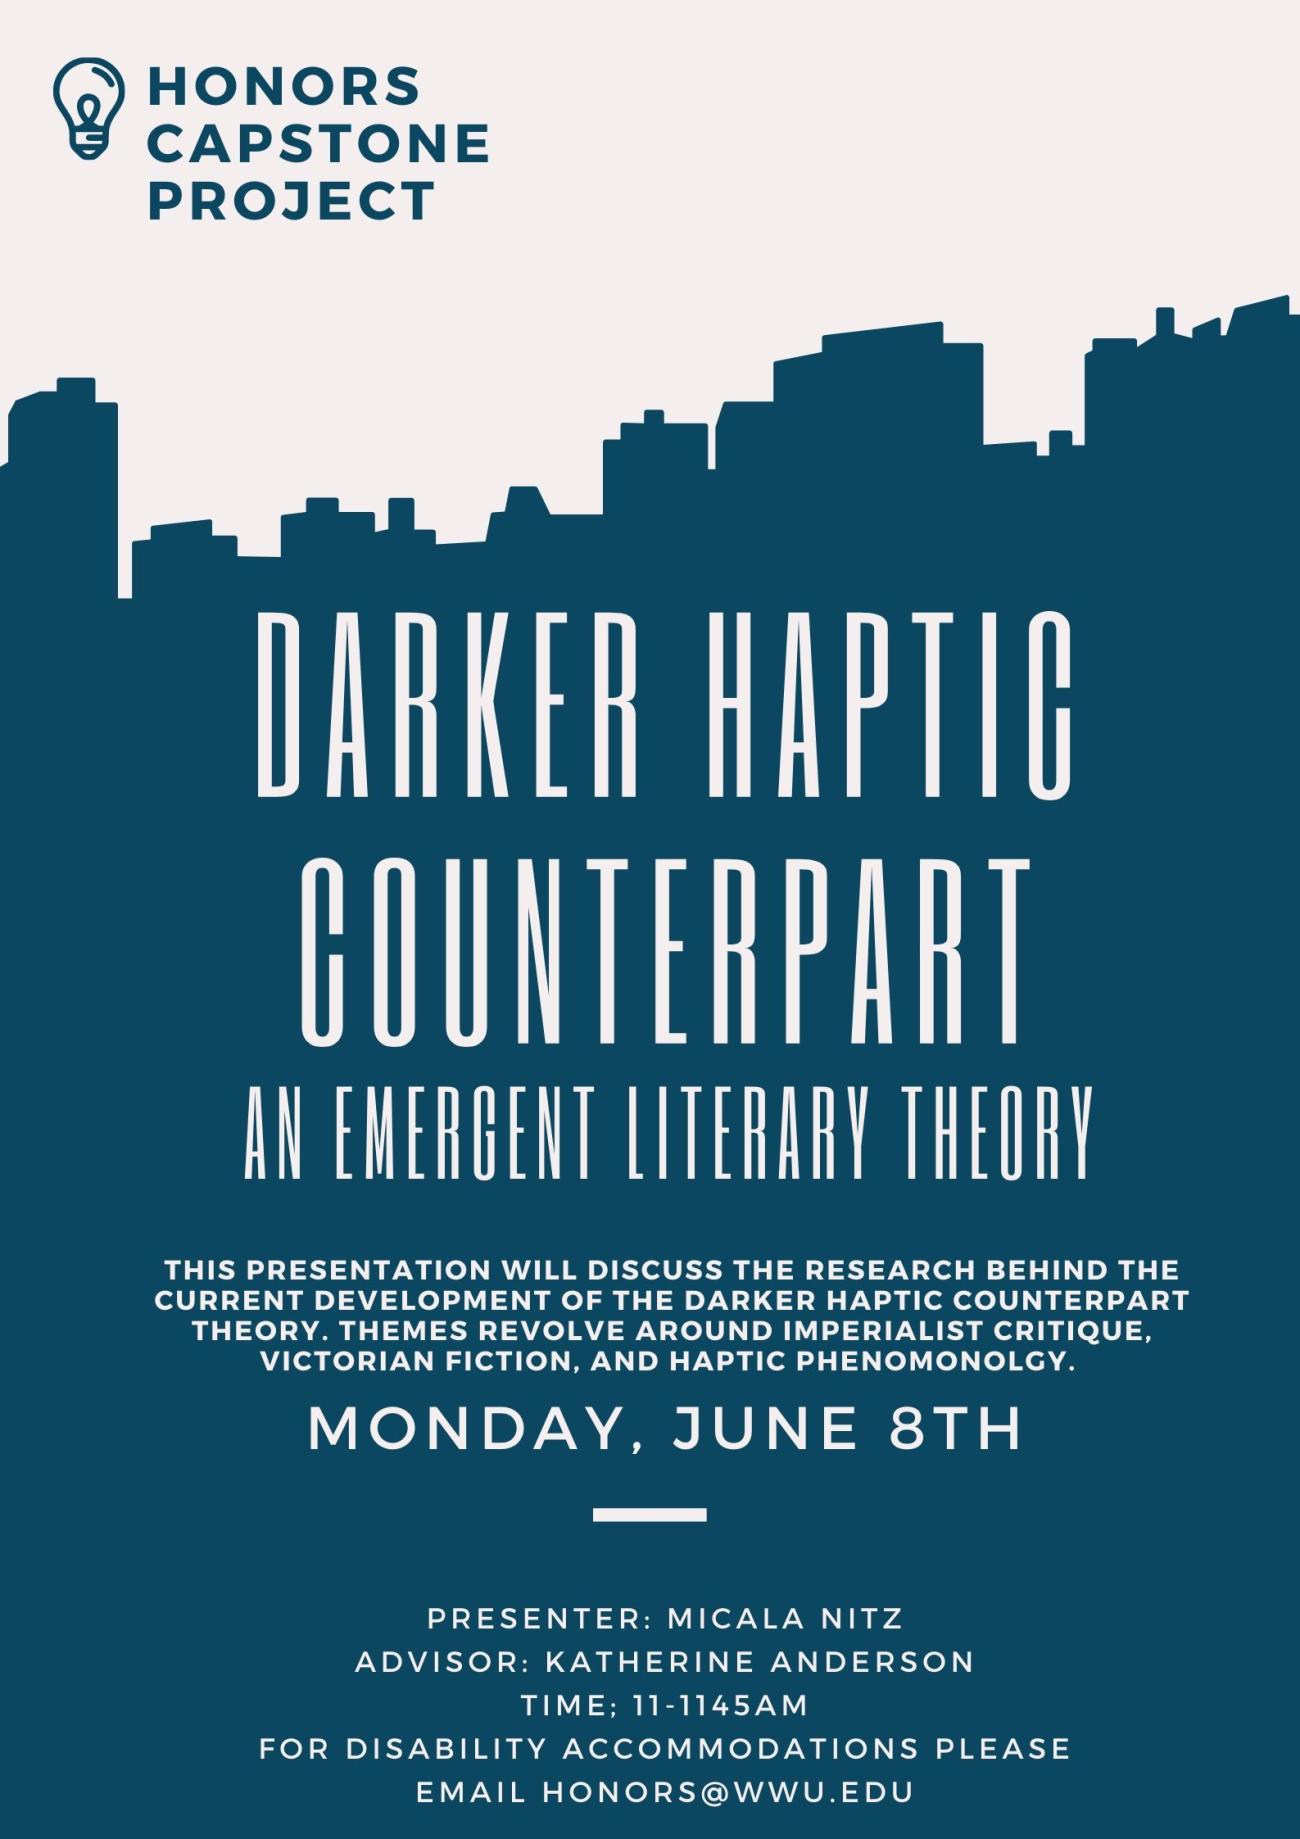 Image: silhouette of a blue city skyline against cream-colored sky. Text: “Honors Capstone Presentation” “Darker Haptic Counterpart: an Emergent Literary Theory” “This presentation will discuss the research behind the current development of the darker haptic counterpart theory. Themes revolve around imperialist critique, Victorian fiction, and haptic phenomenology” “Presentation by Micala Nitz, Advisor Katherine Anderson” “Monday, June 8th, 11 am” “For disability accommodations please email honors@wwu.edu"